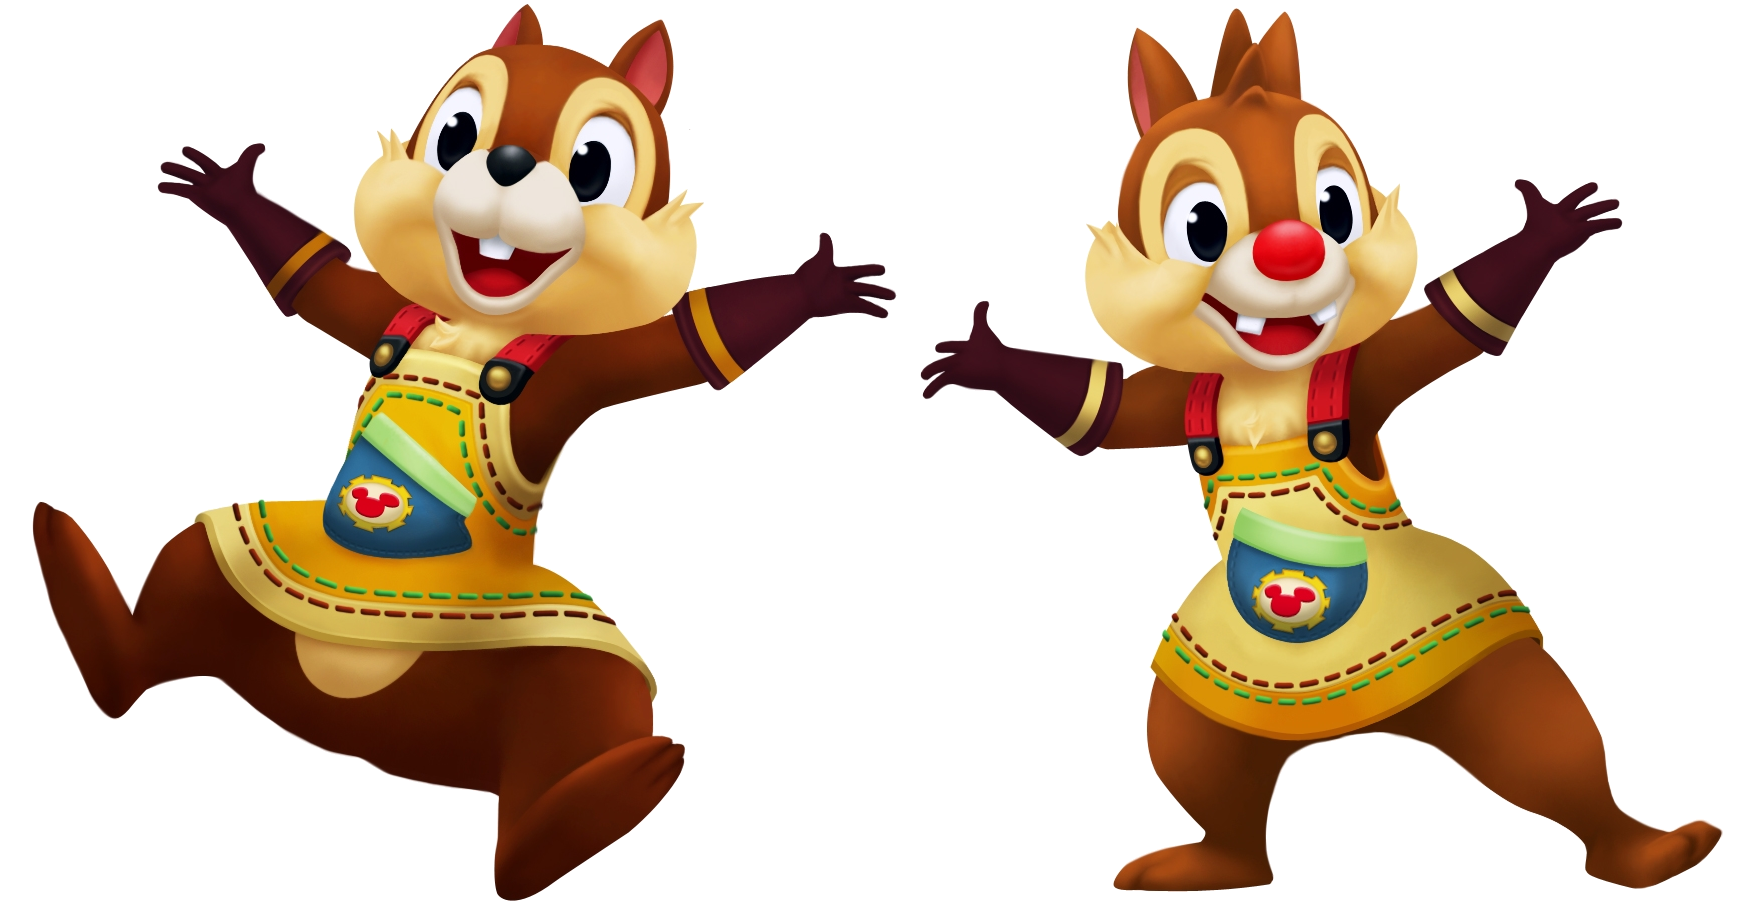 Chip and dale wiki